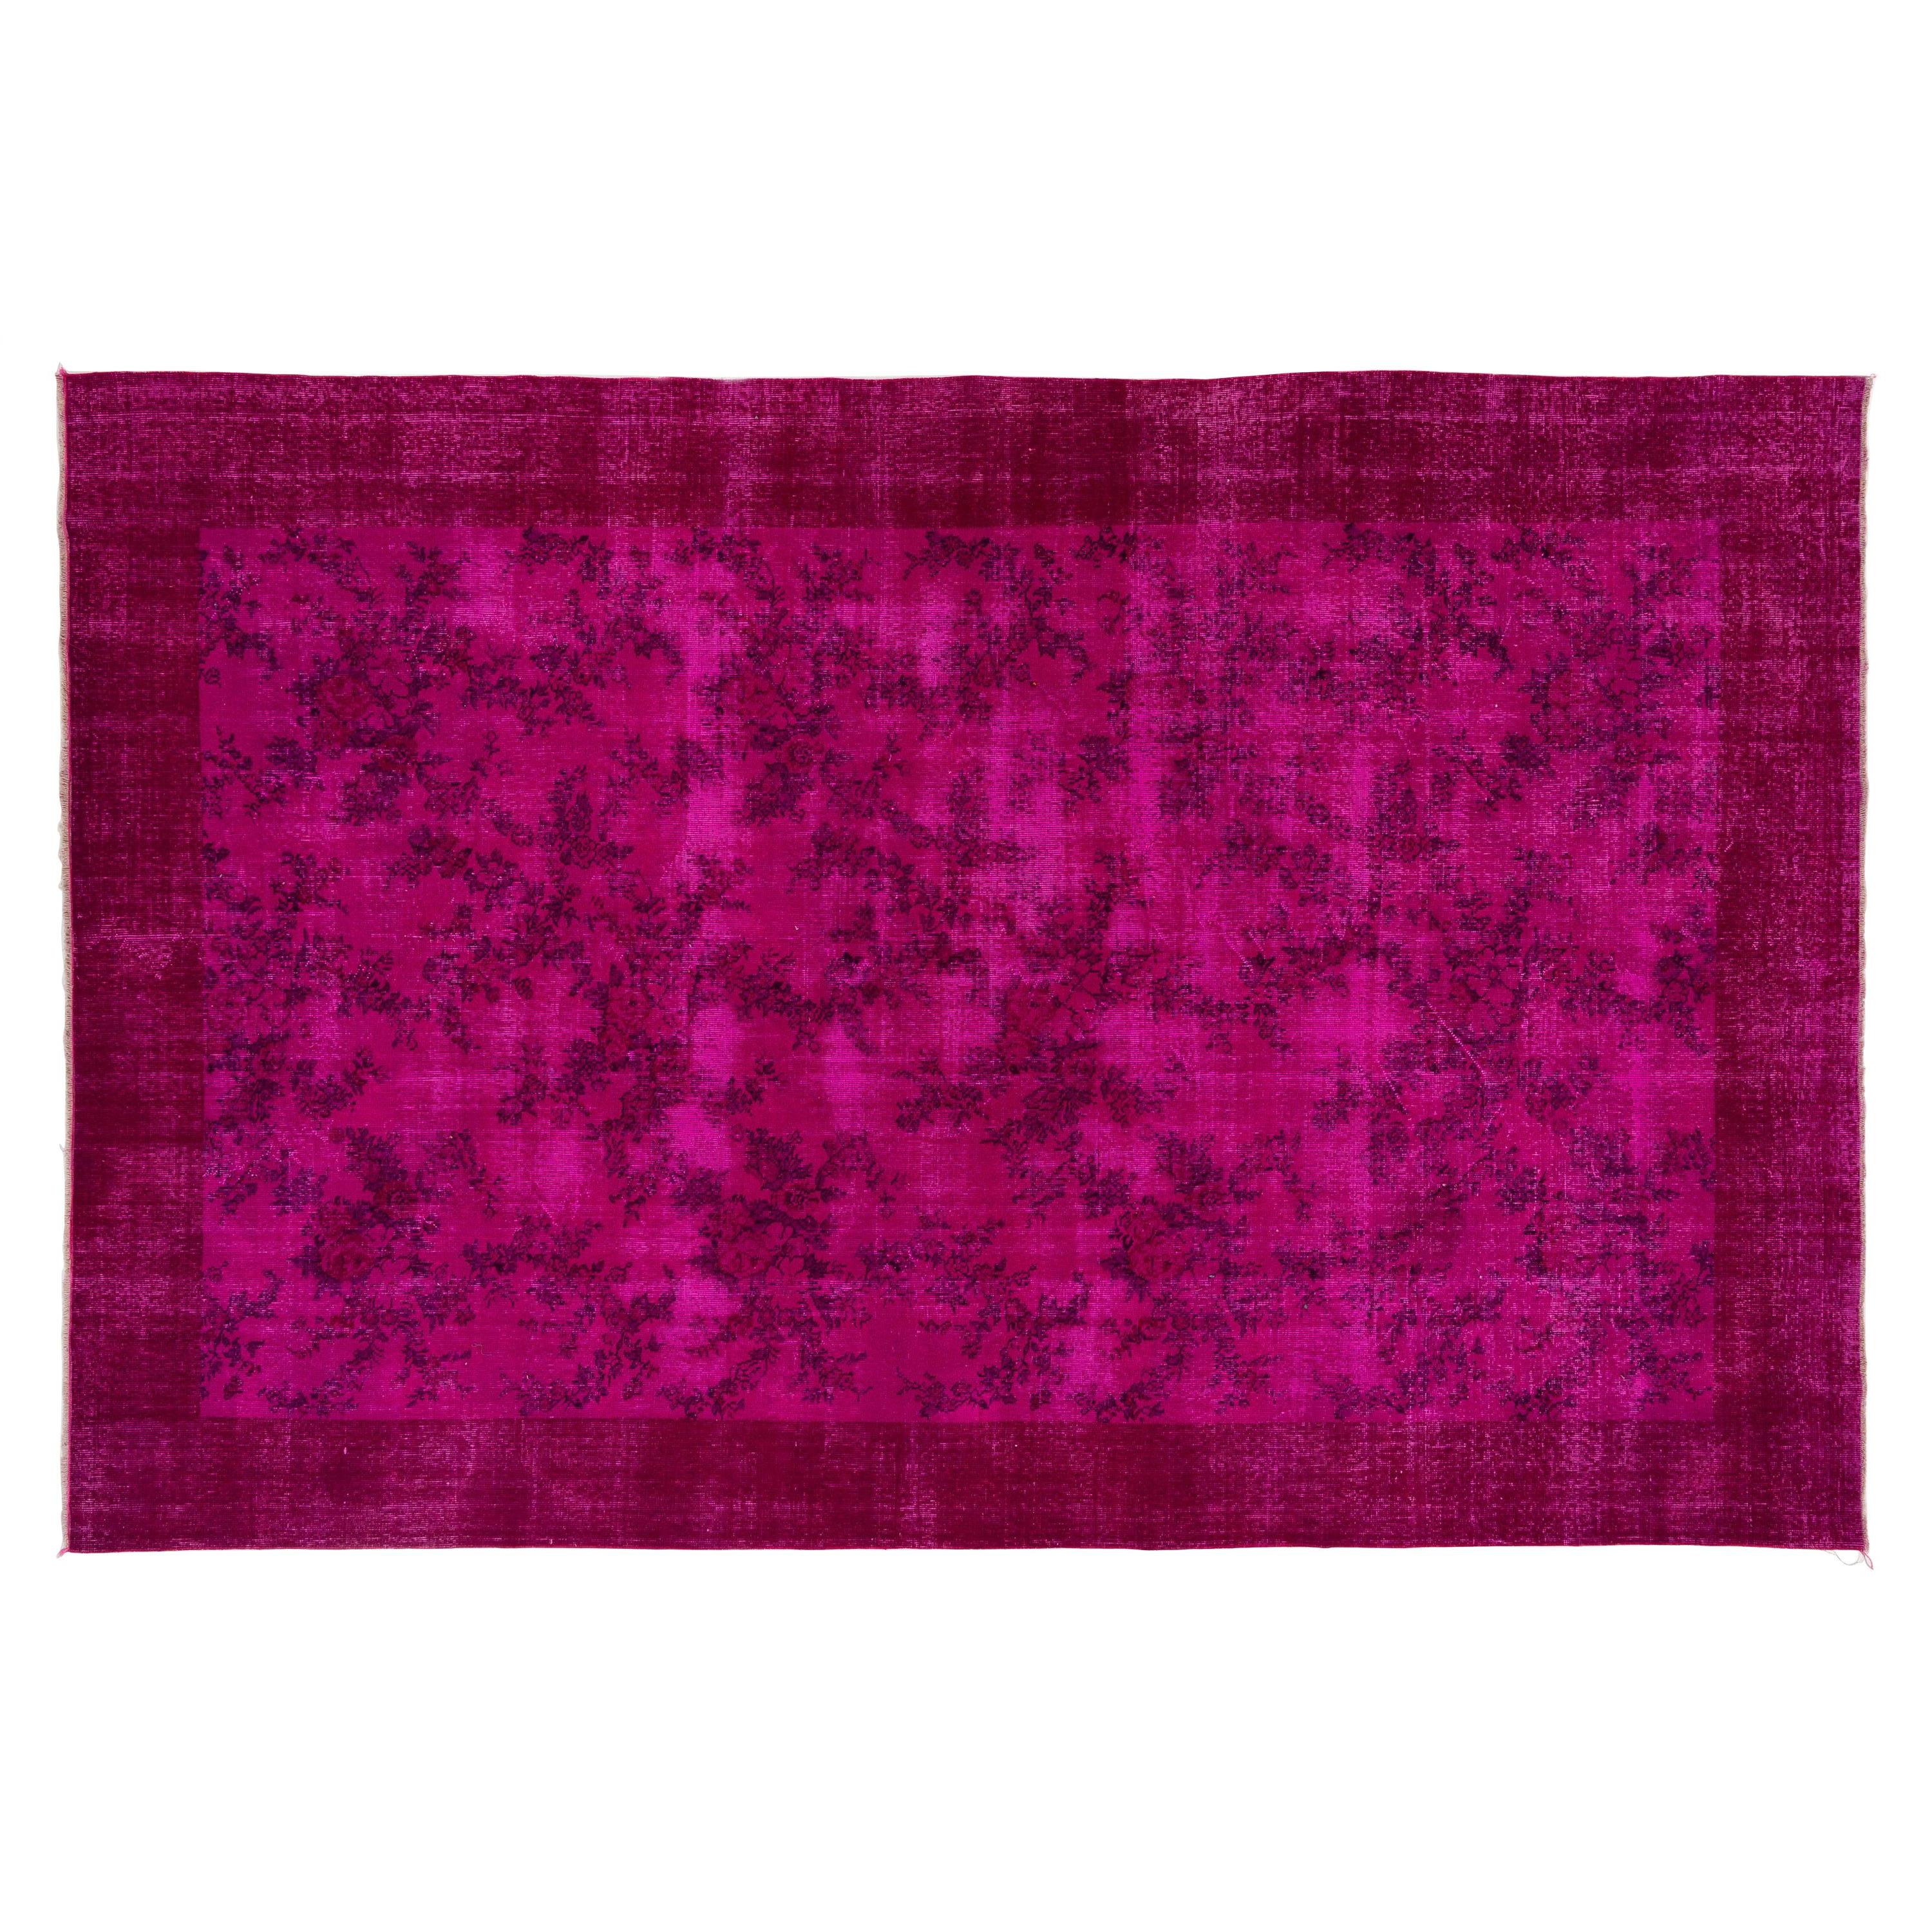 Wool Vintage Turkish Rug with Floral Design Re-Dyed in Fuschia Pink Color